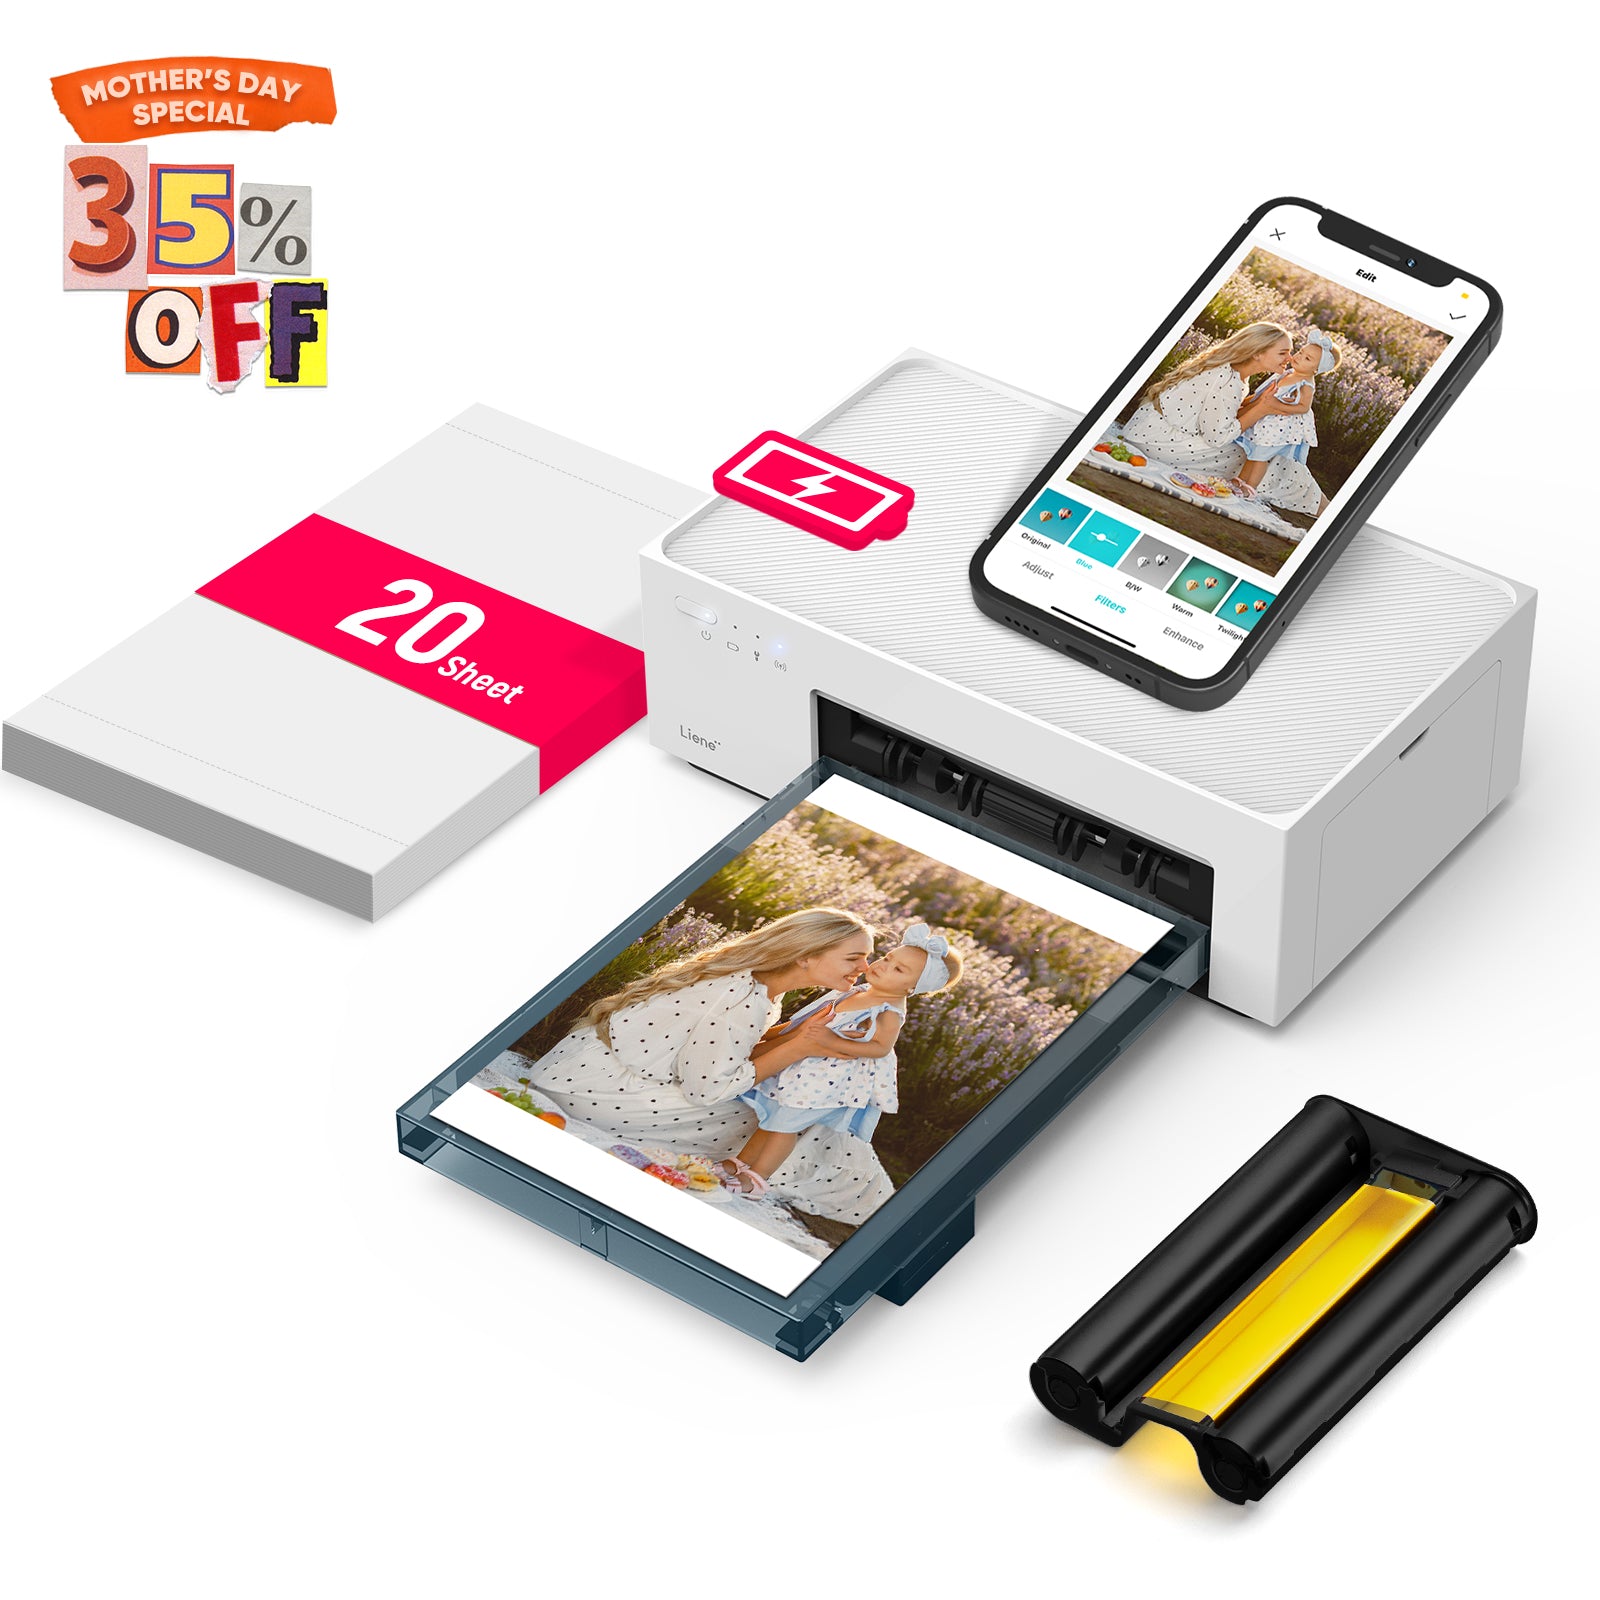 Liene Amber Instant Photo Printer White Built-in Rechargeable Battery M200